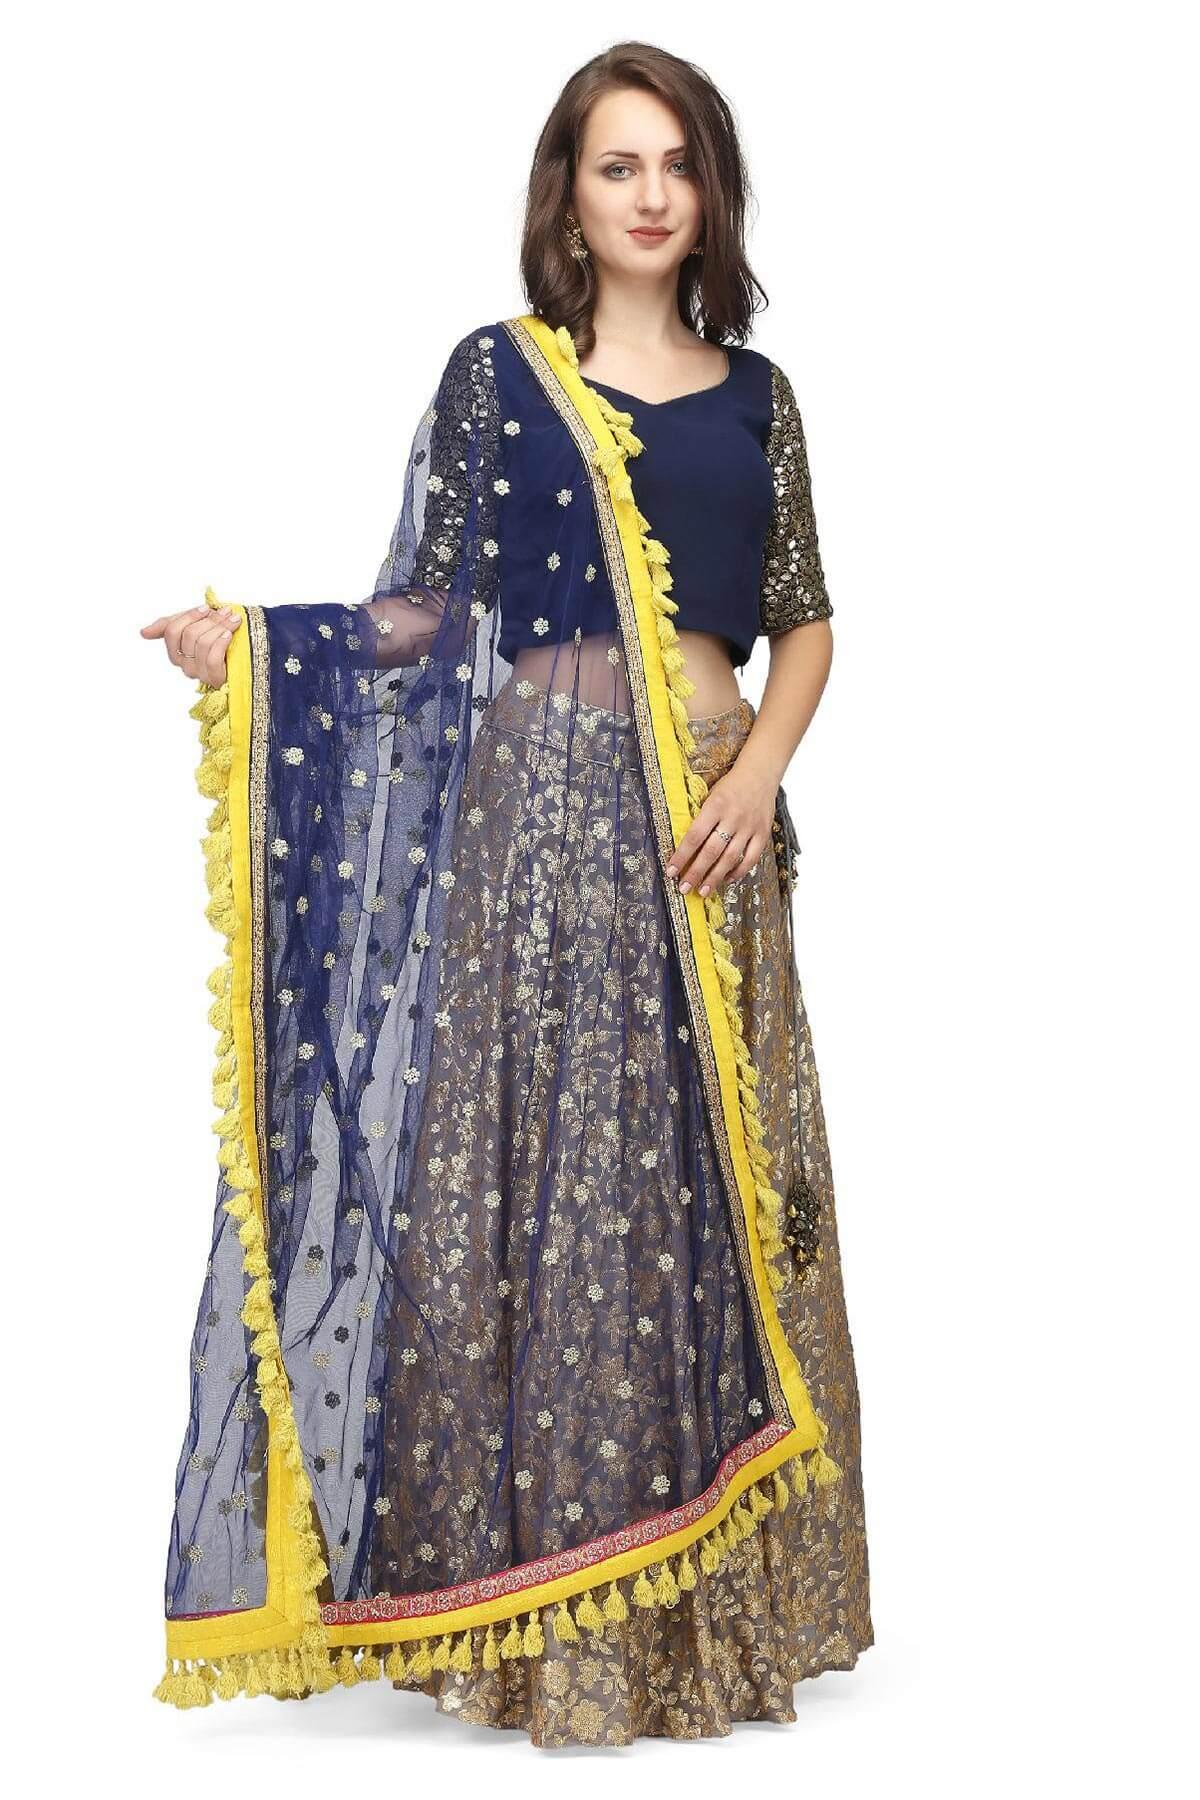 Buy Navy Blue Colored Partywear Embroidered Lehenga Choli Online At Zeel  Clothing